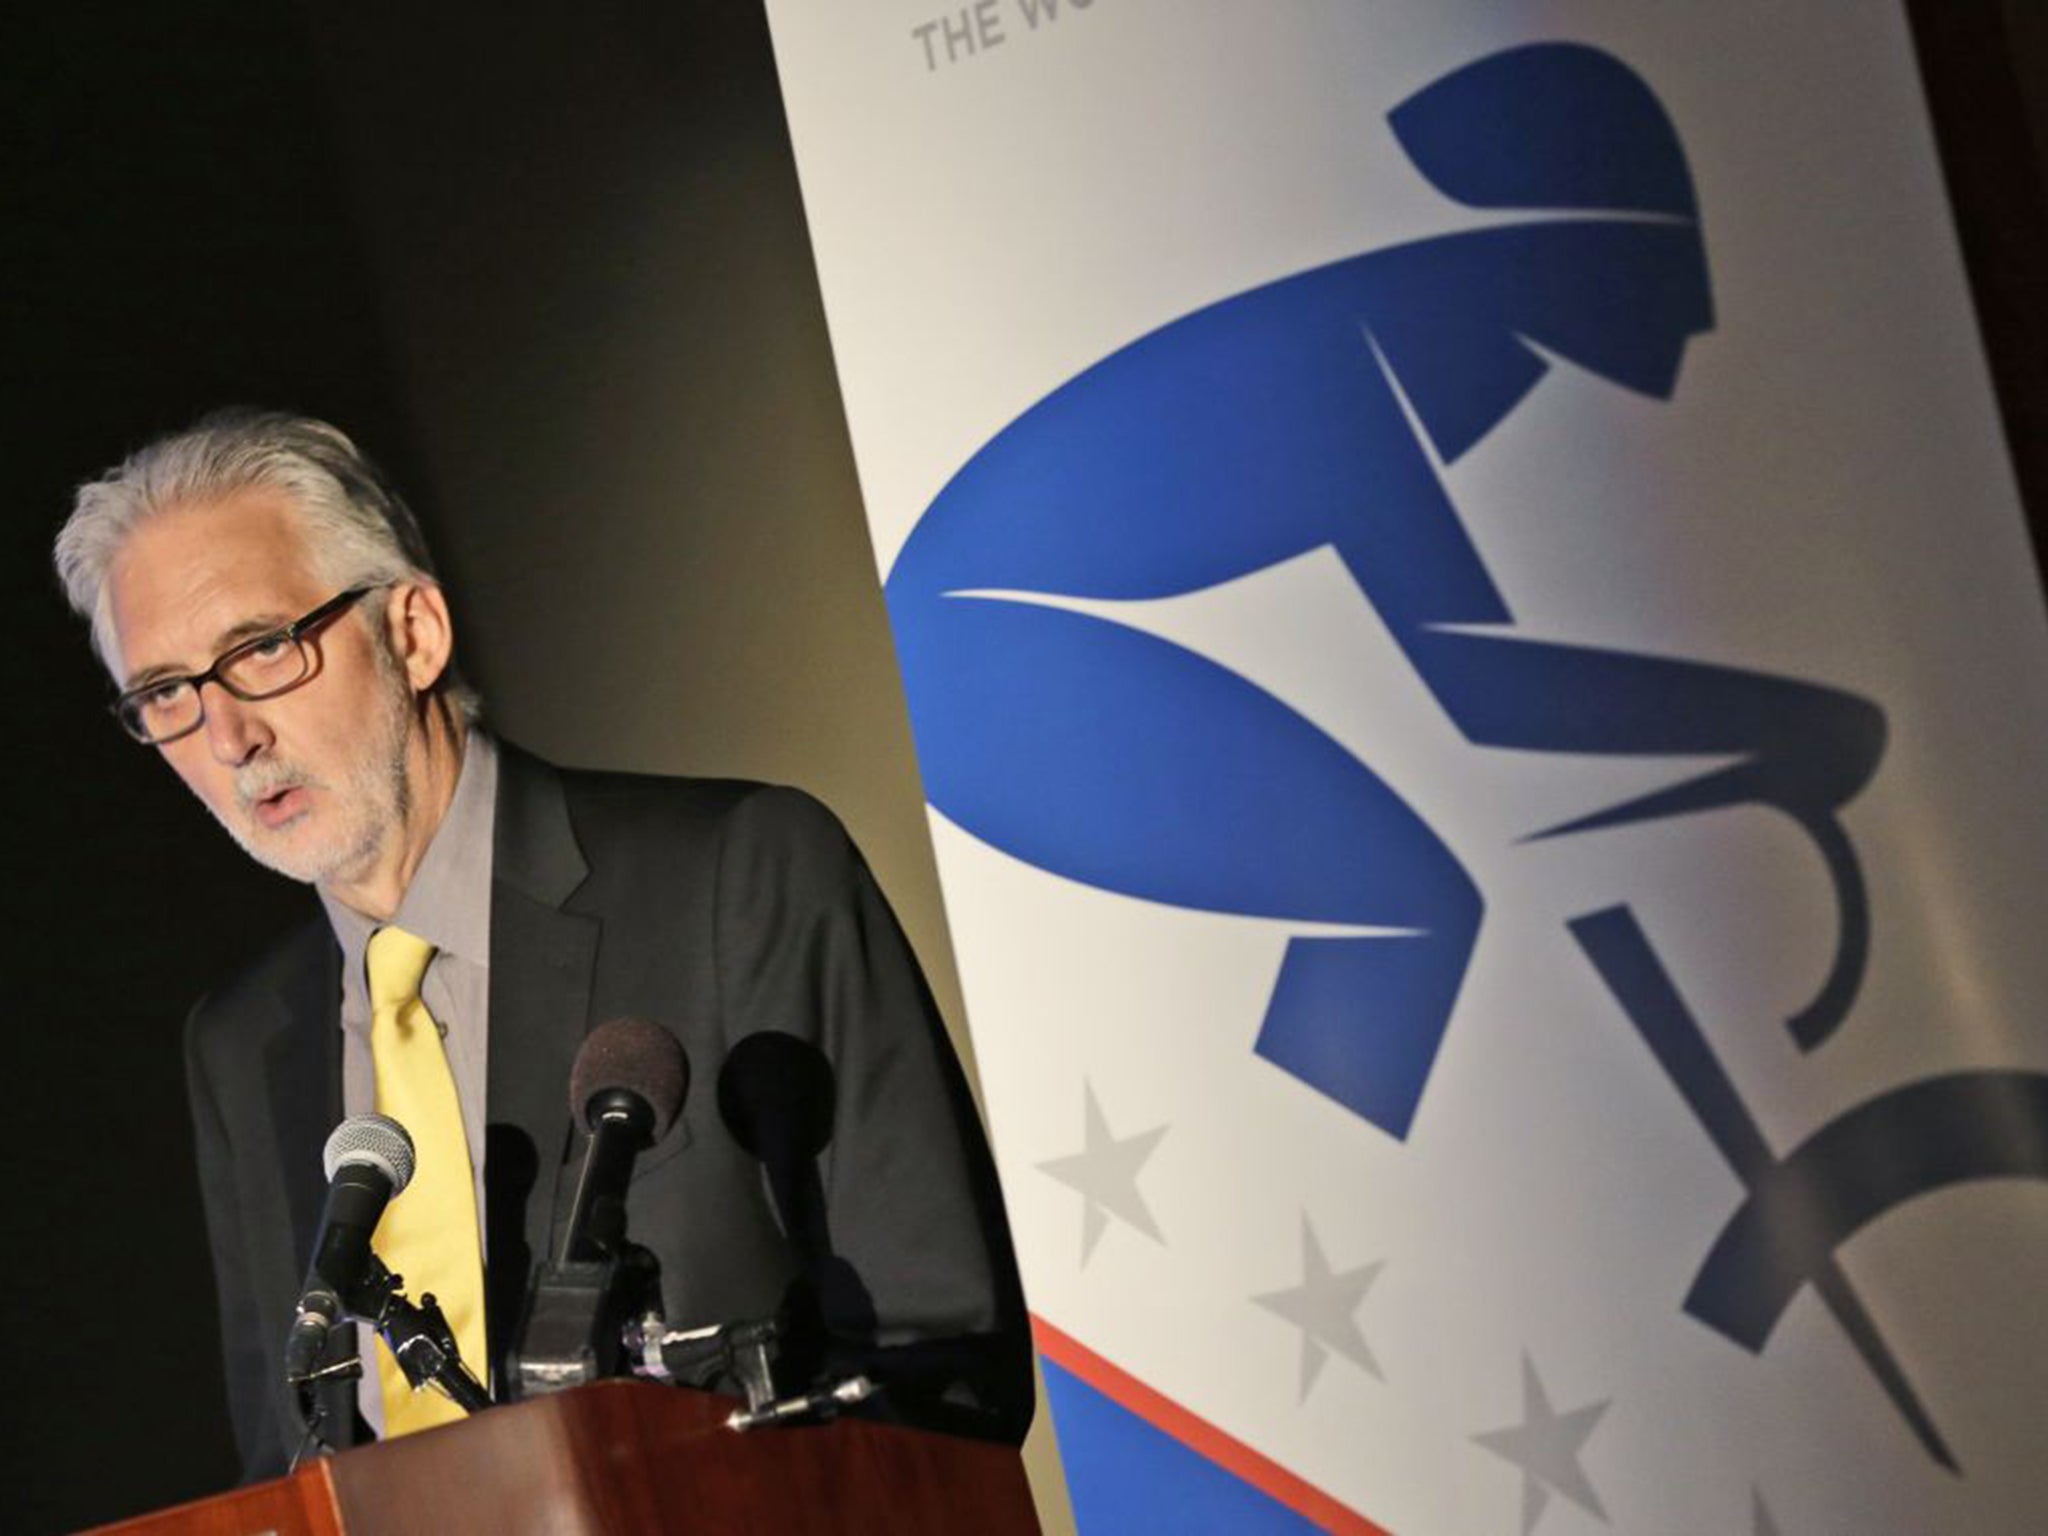 Brian Cookson, the UCI president, set up the Cycling Independent Reform Commission (CIRC) to investigate doping in the sport